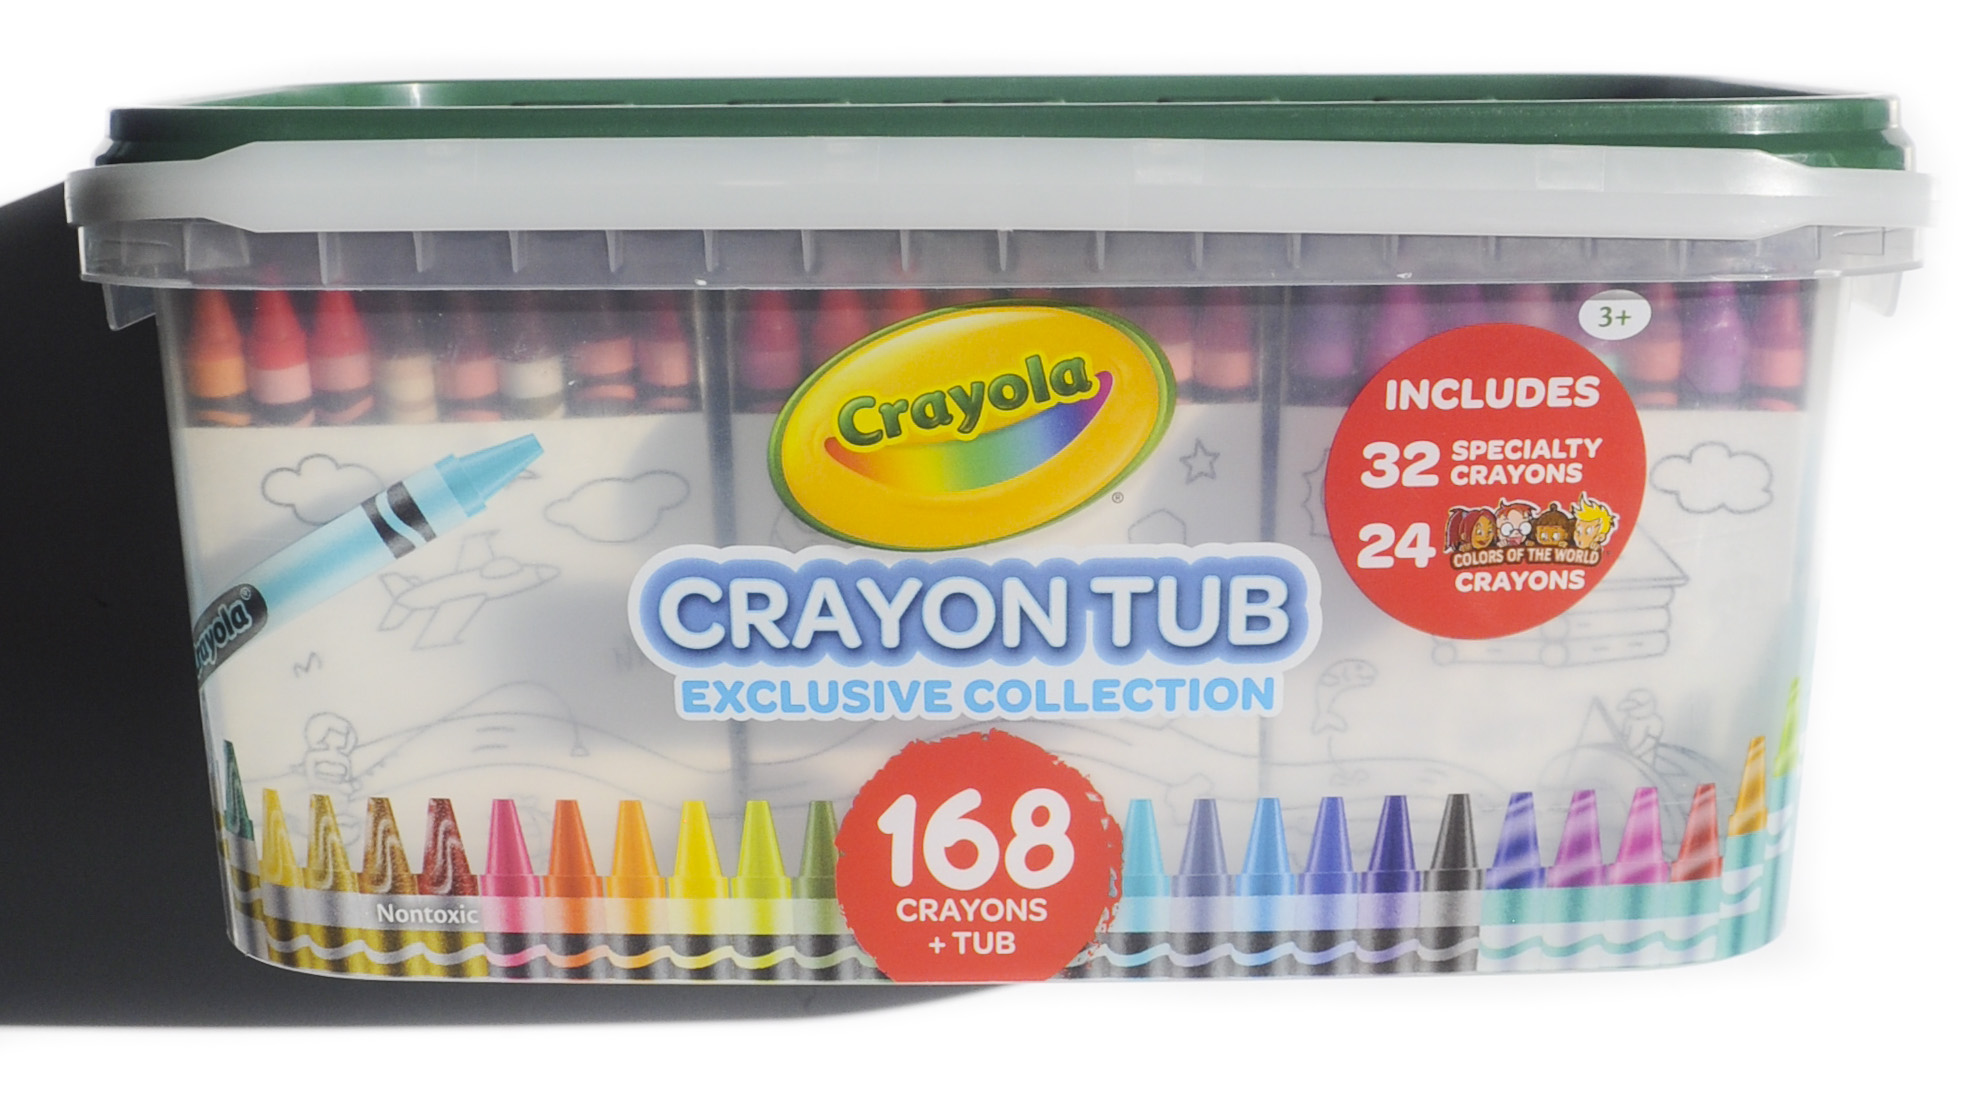 120 Specialty Crayola Crayons: Pearl, Glitter, Metallic, Neon and Confetti